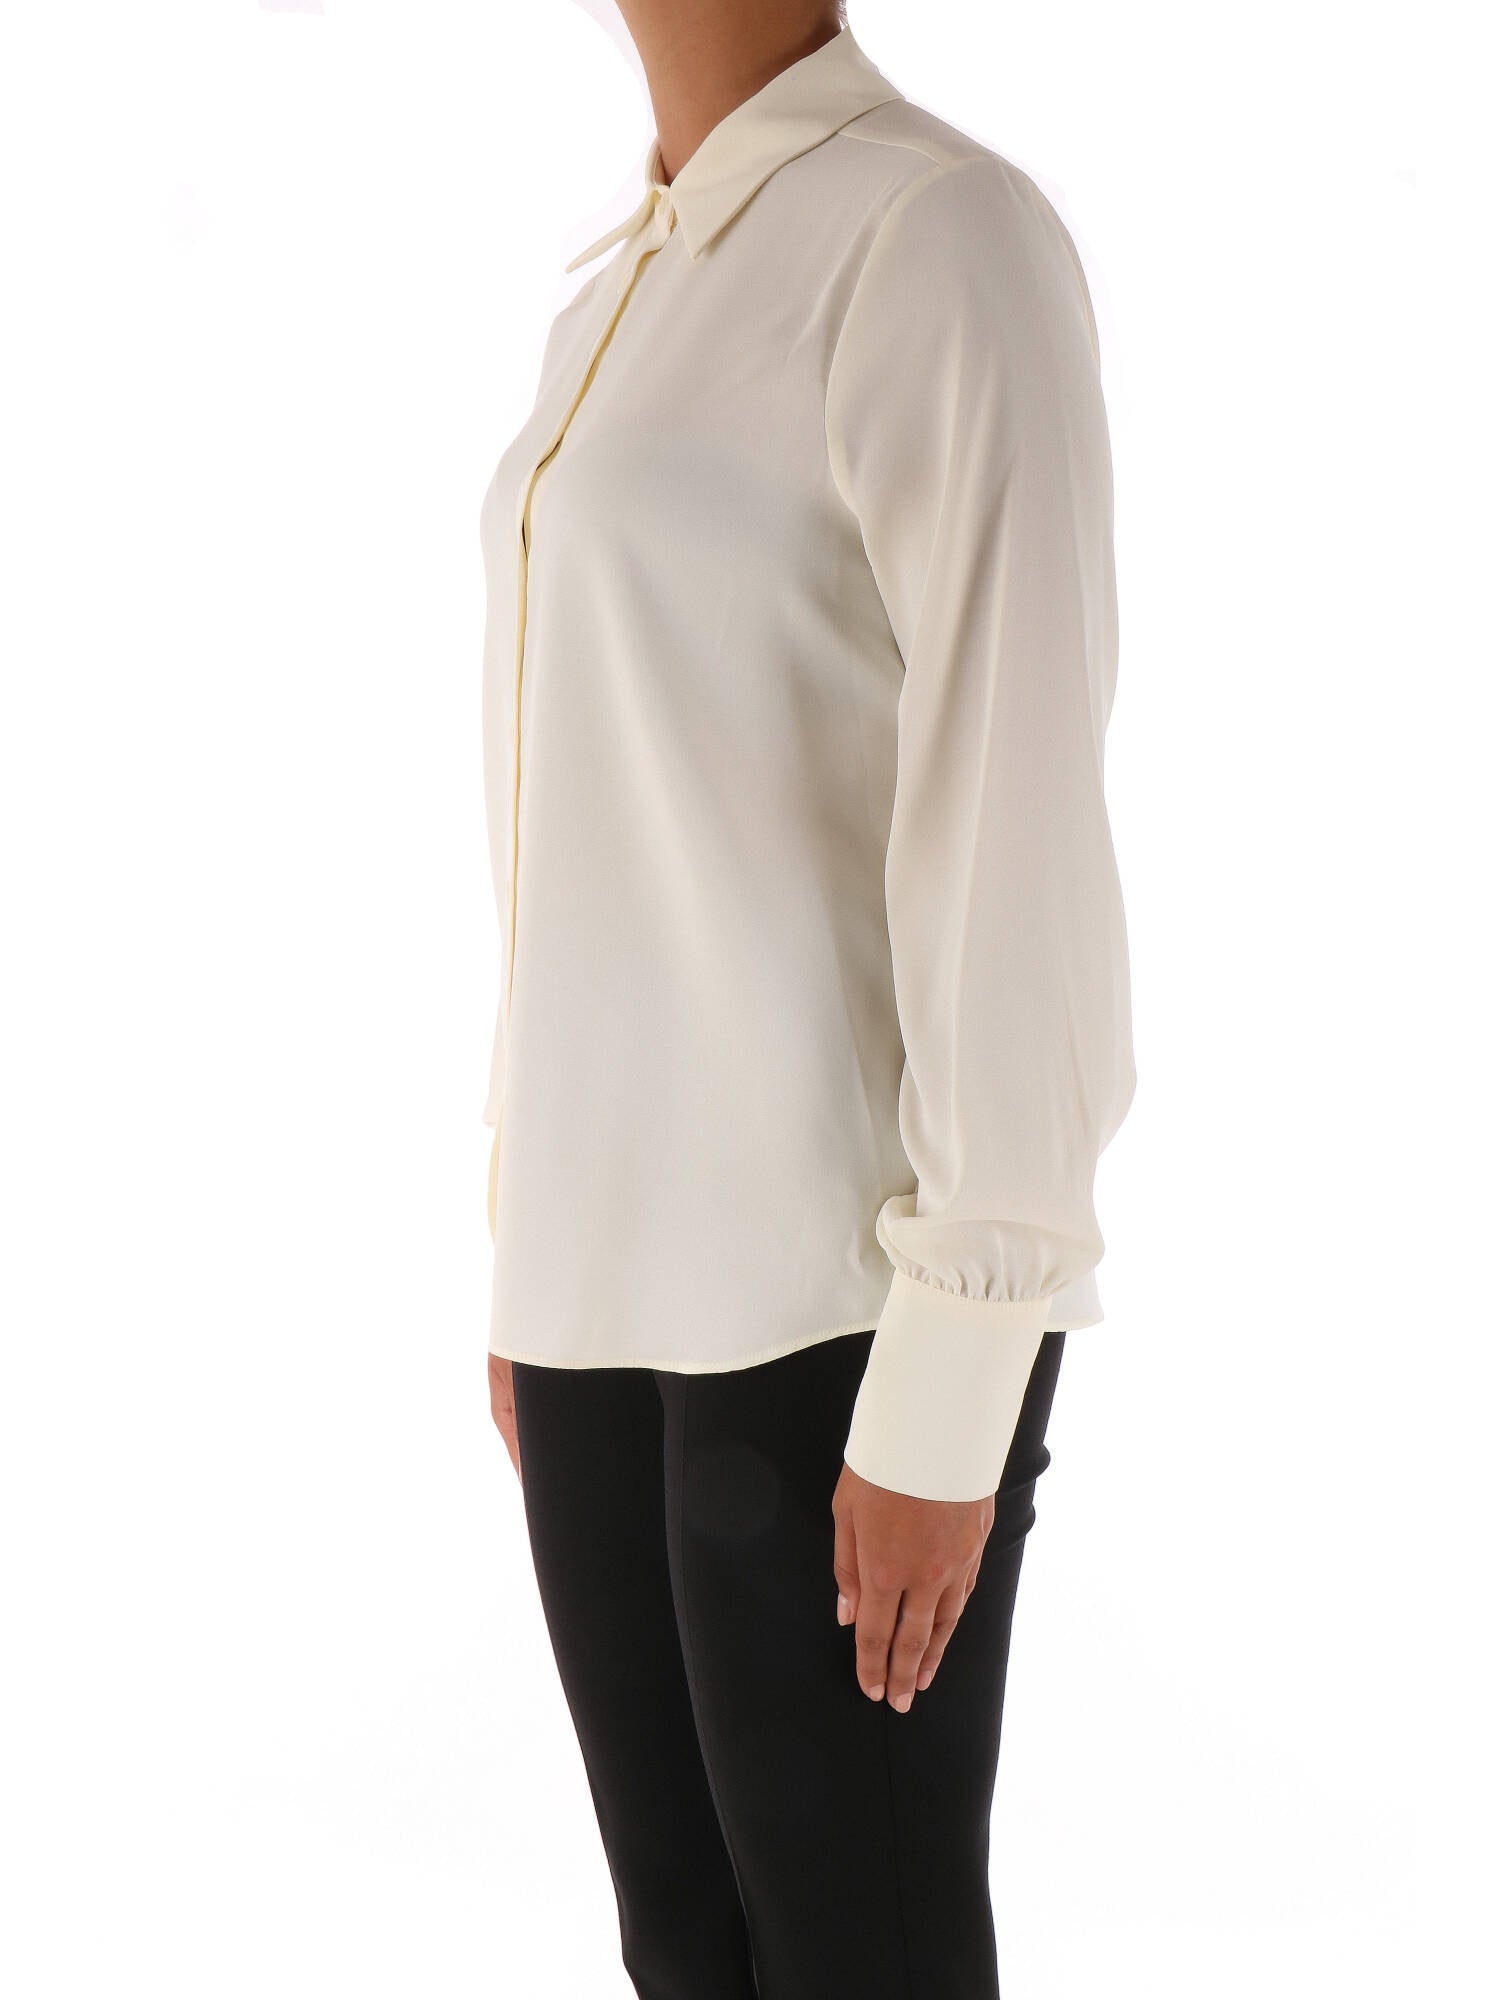 Twinset camicia donna in crepe cady